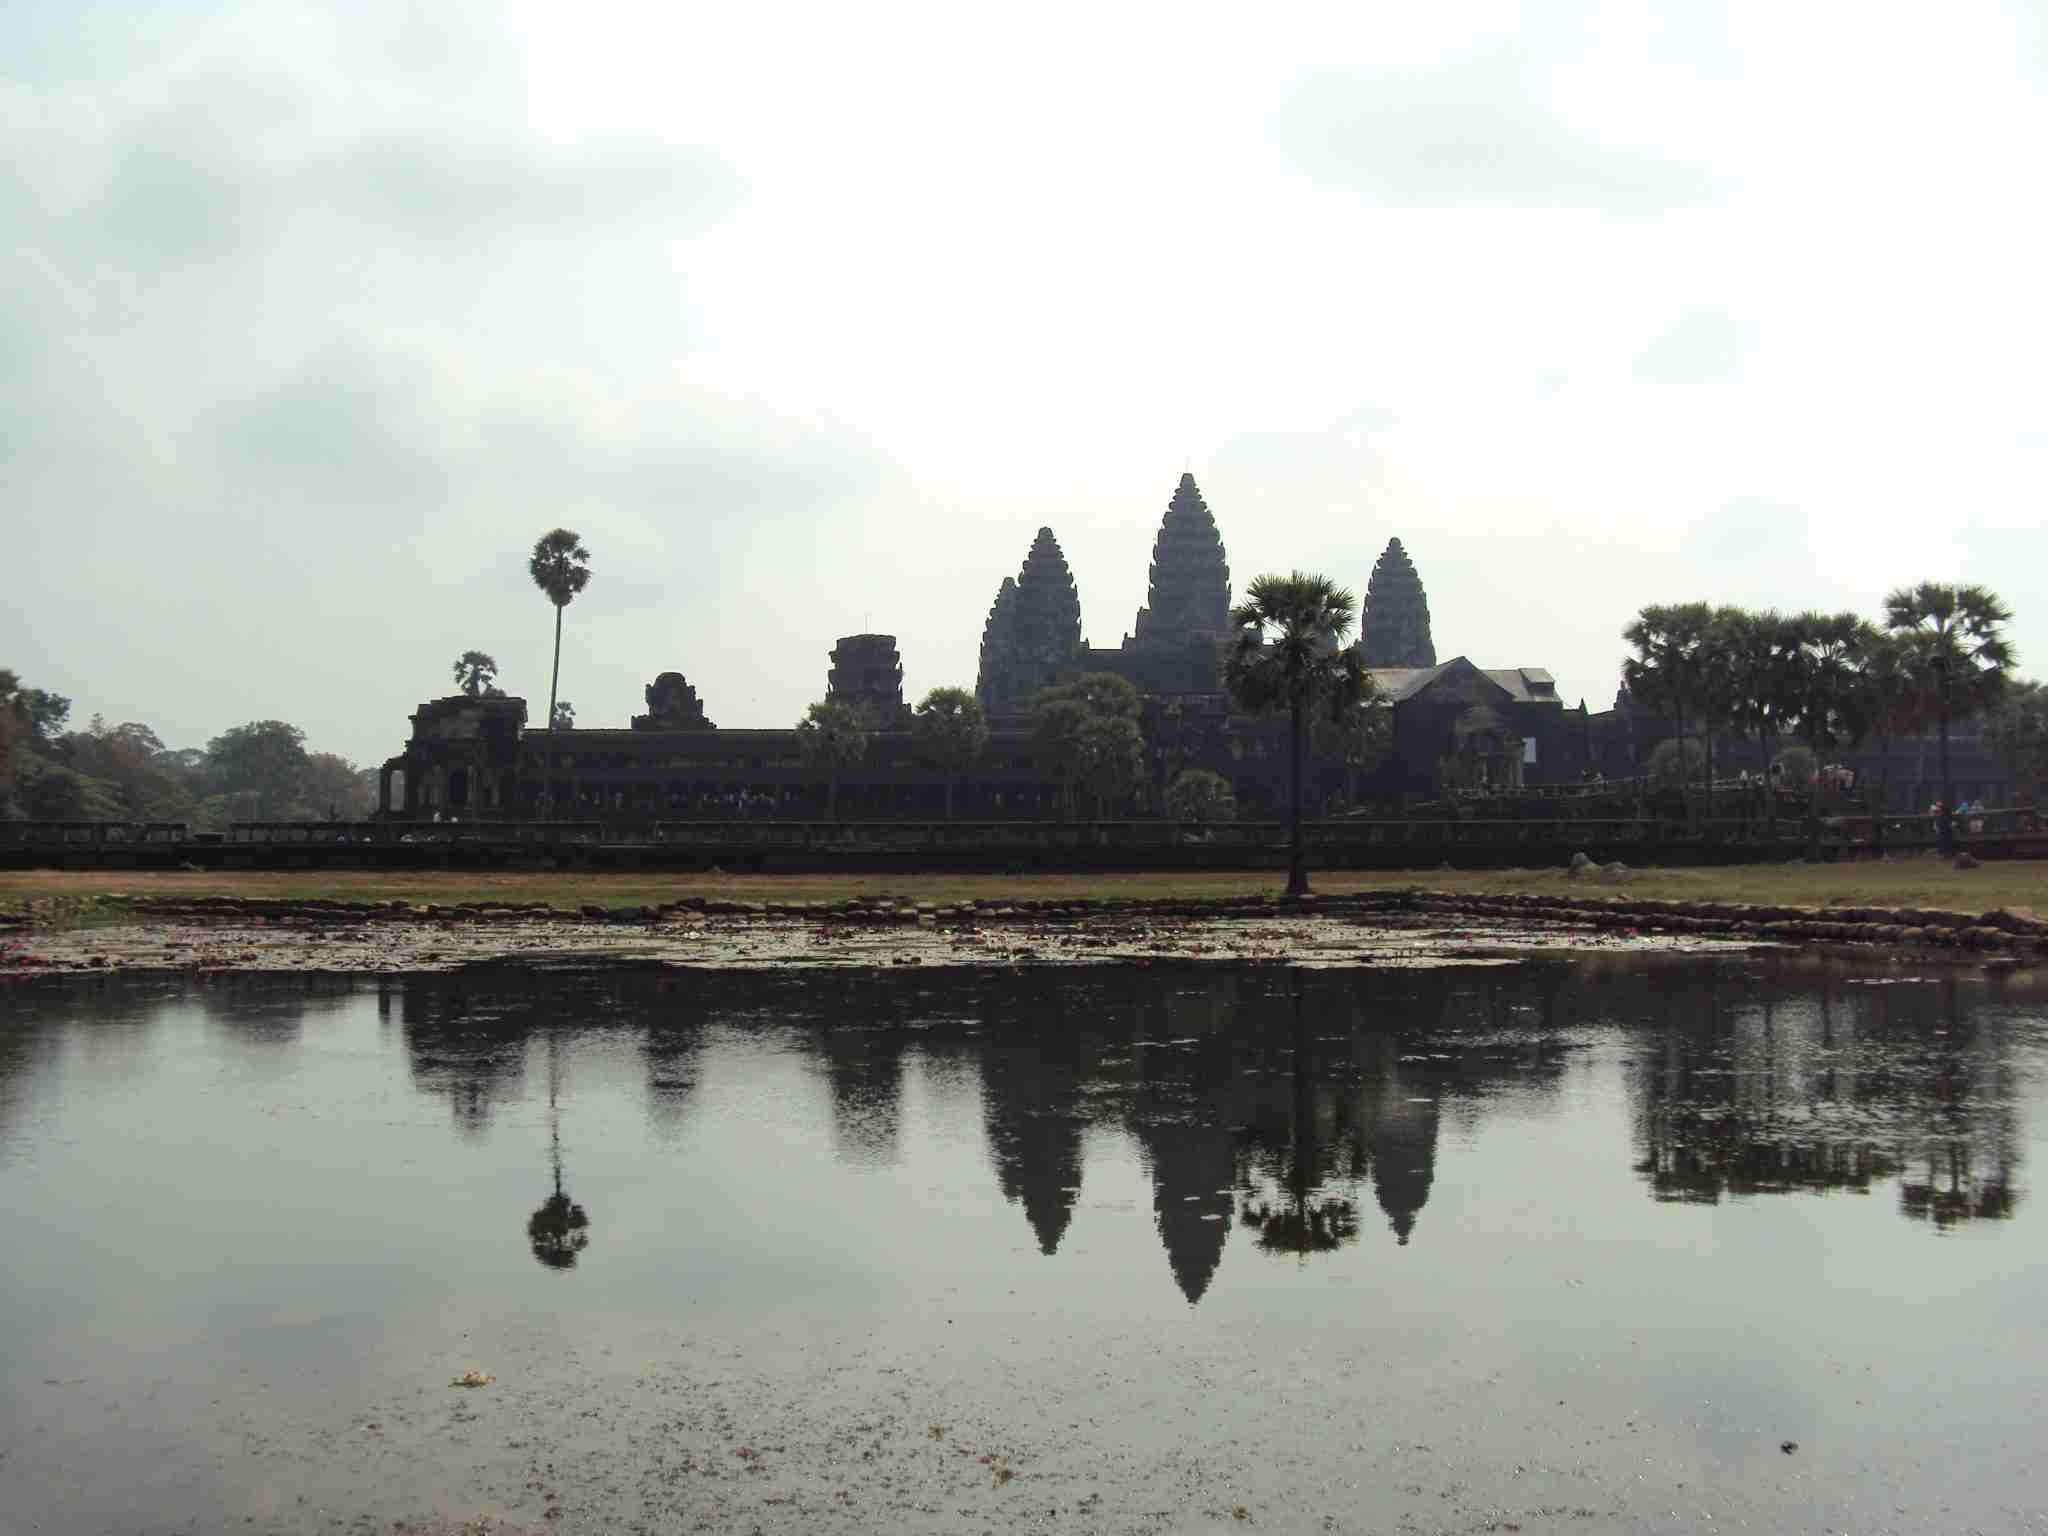 The temples of Angkor Wat